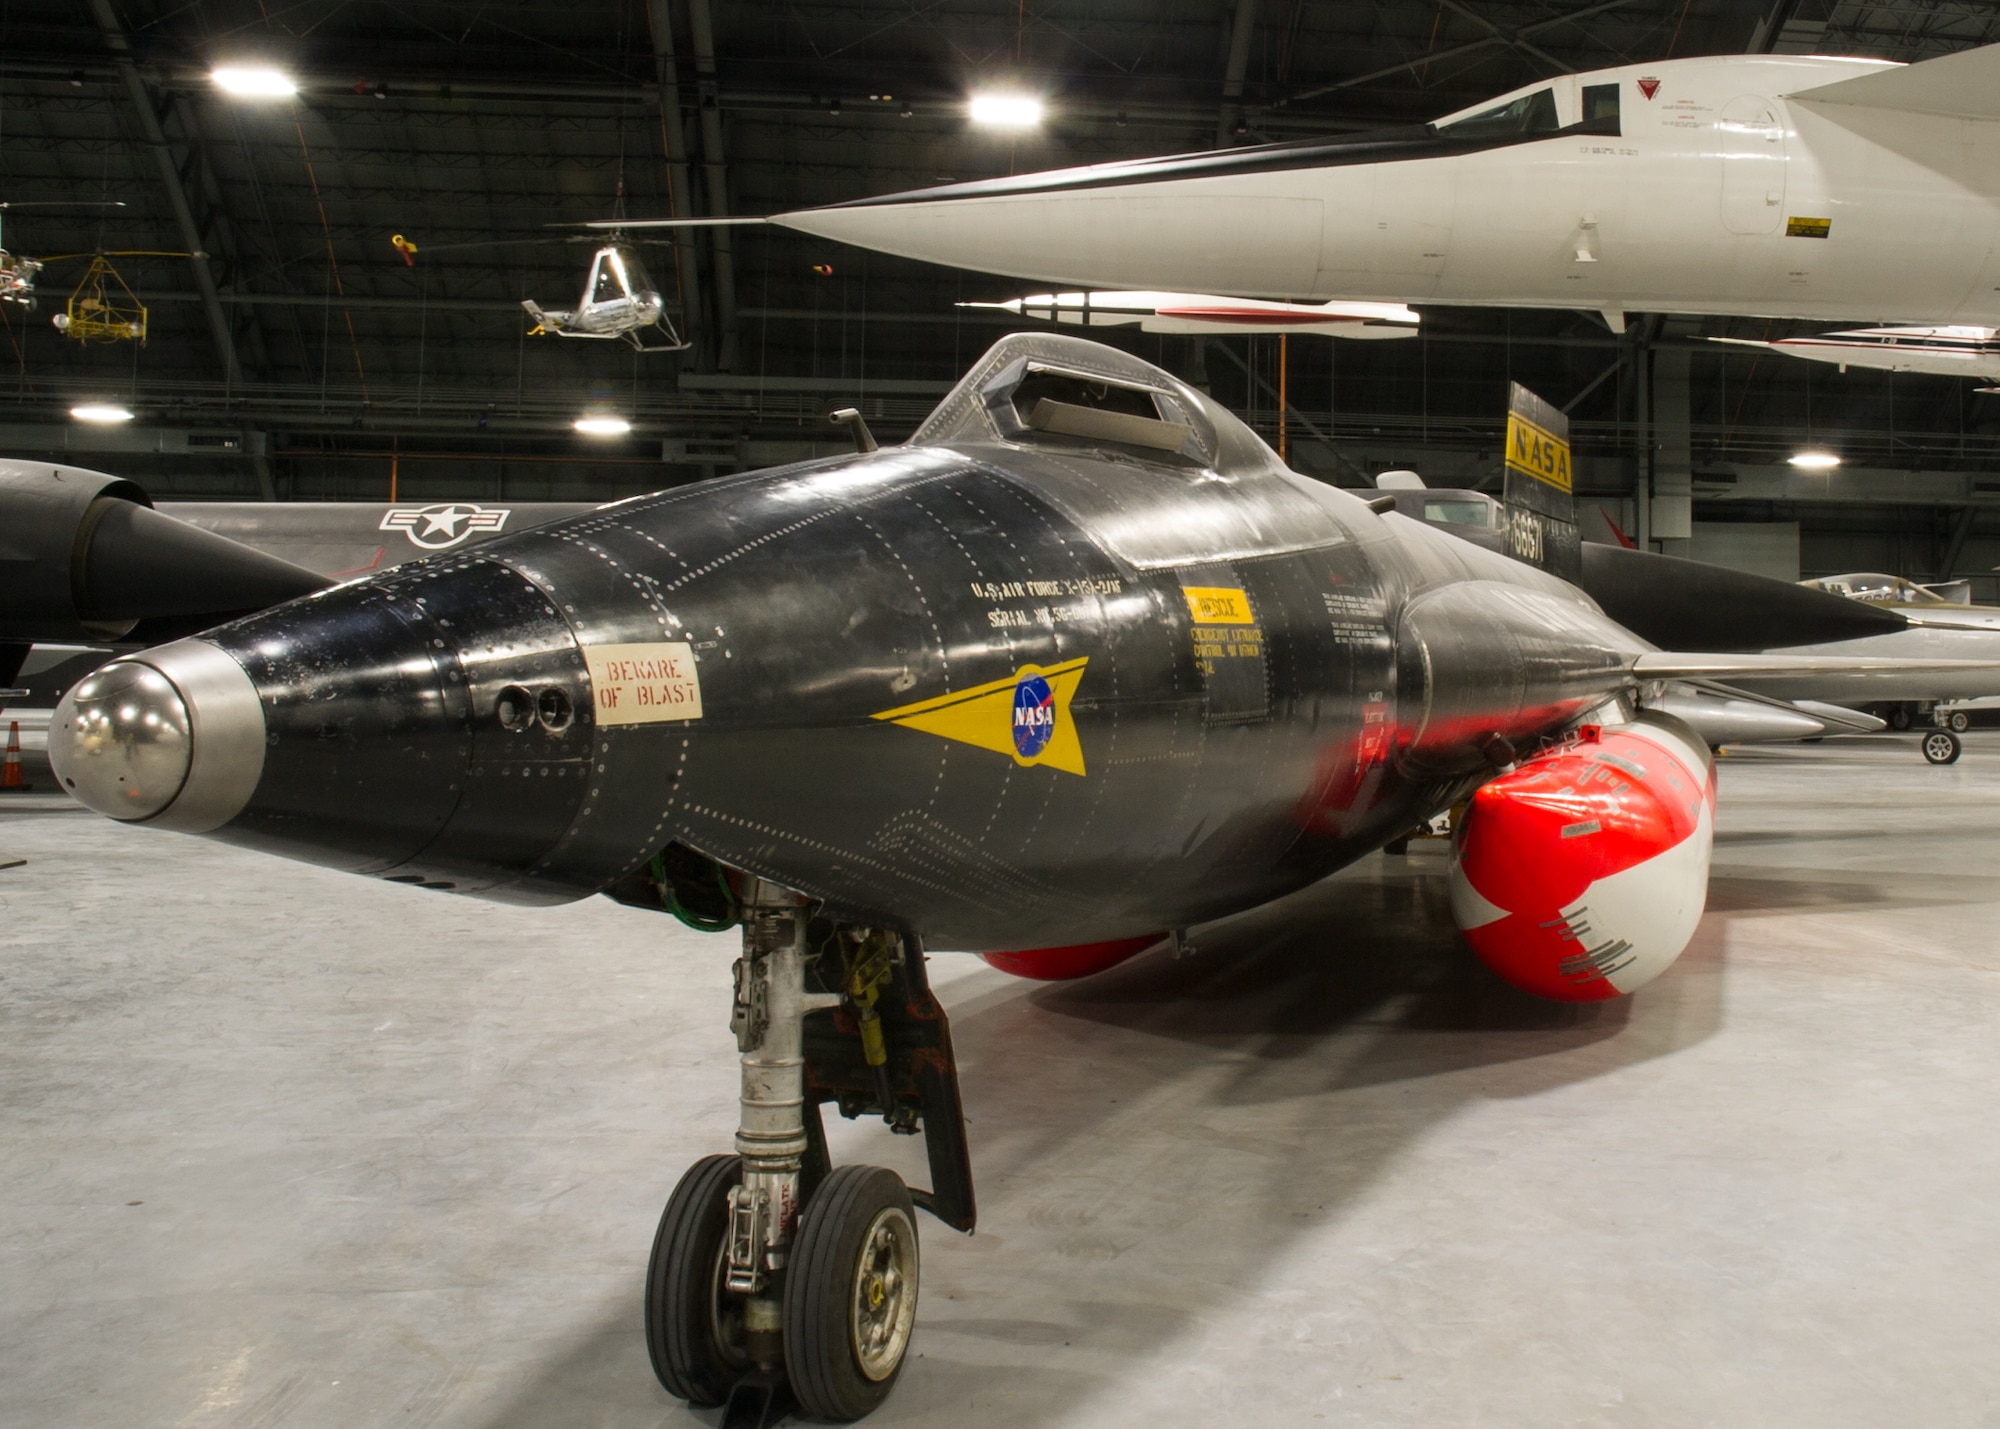 DAYTON, Ohio -- North American X-15A-2 on display in the Space Gallery at the National Museum of the United States Air Force. (U.S. Air Force photo by Ken LaRock)
